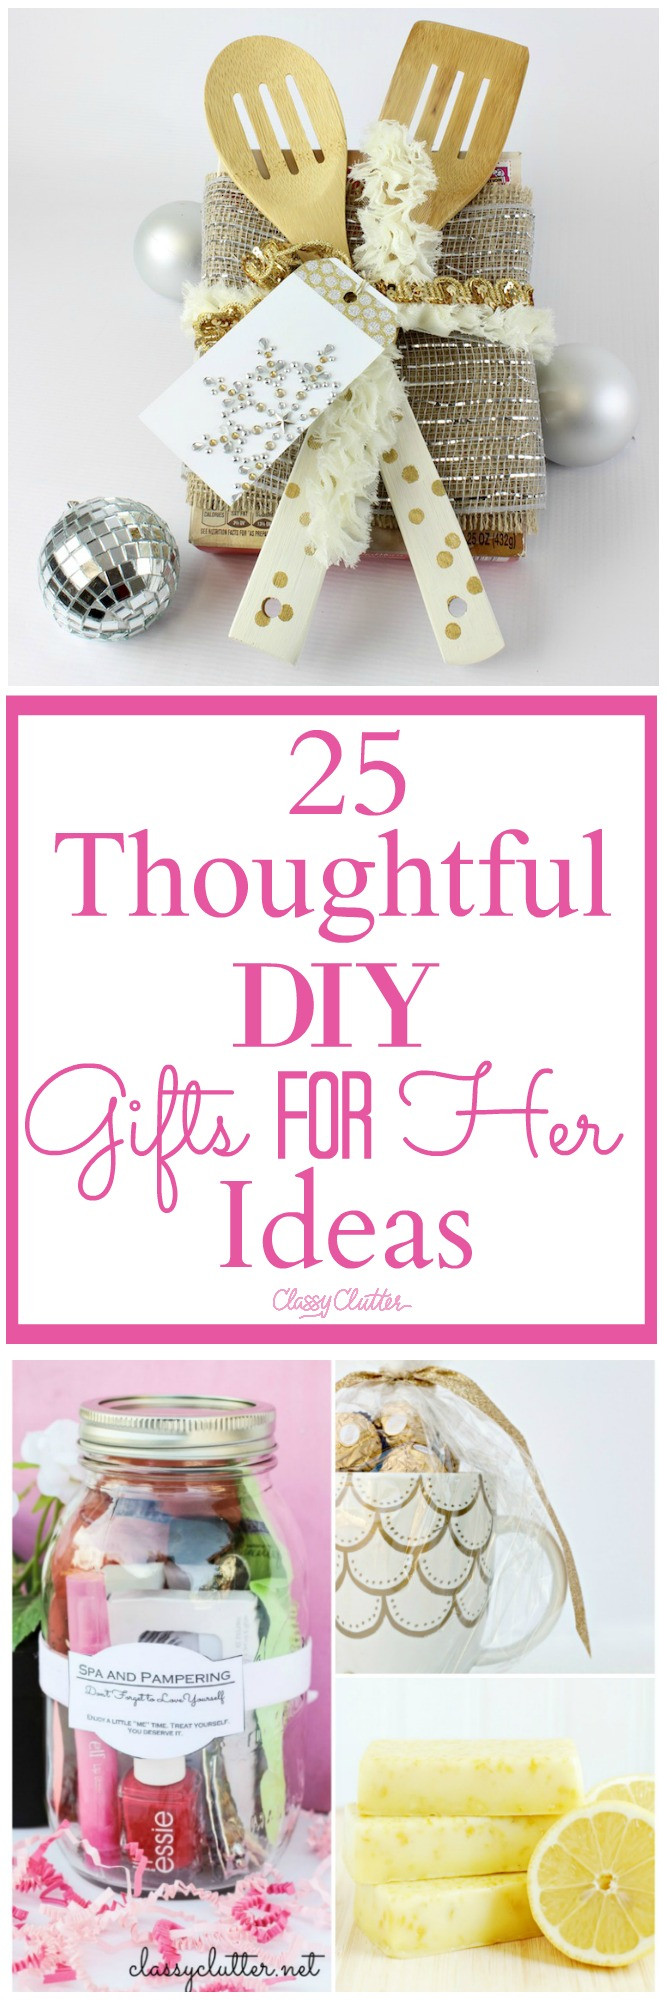 DIY Gifts For Her
 25 Thoughtful DIY Gifts for Her Ideas Classy Clutter